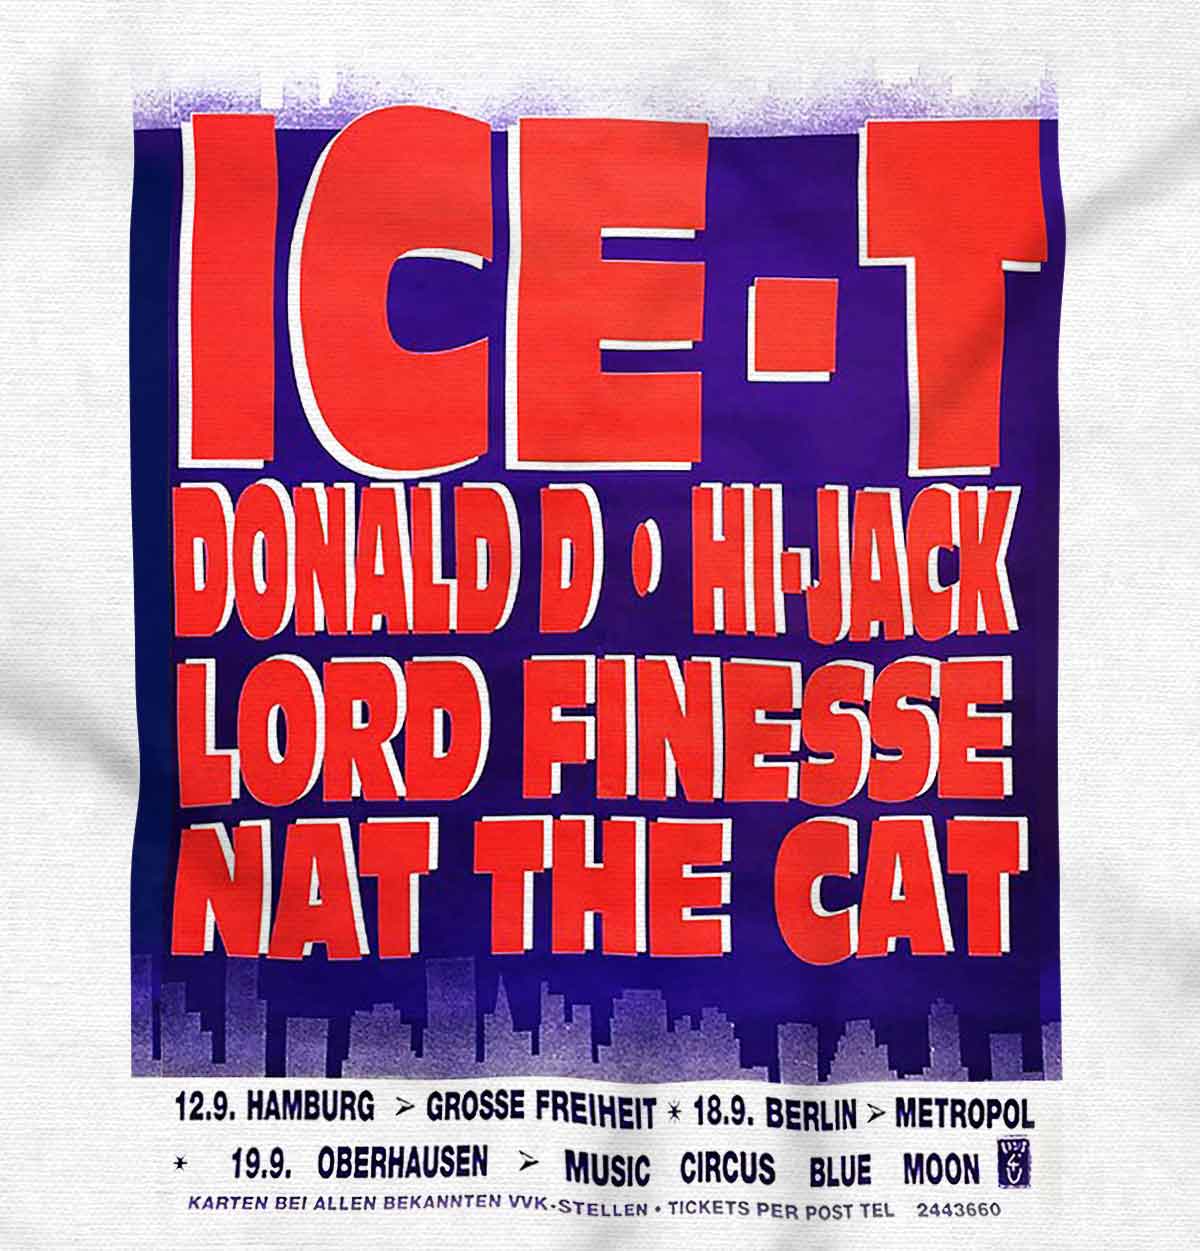 The image shows the names of Ice T and Donald D, who have made their mark in the Hip-Hop industry. They are both respected artists.